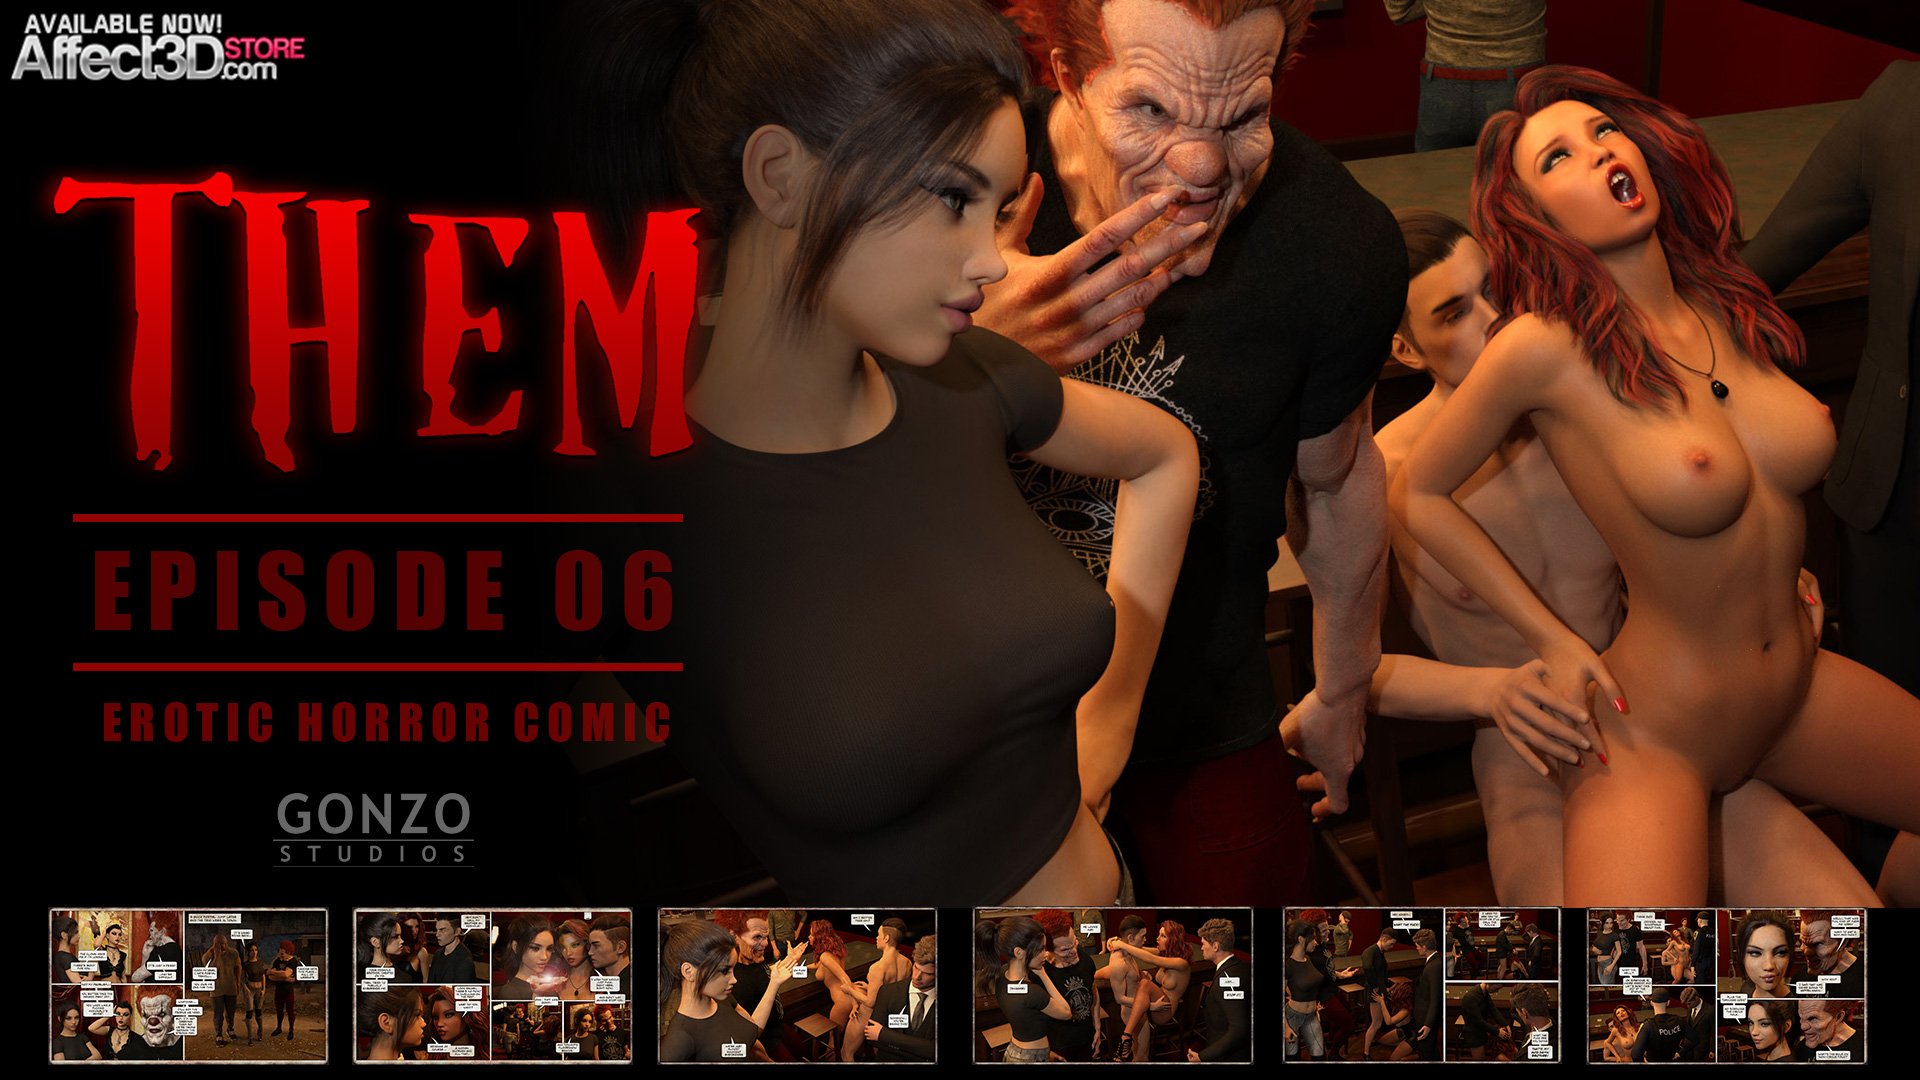 THEM Episode 6 – Season Finale! New Release from Gonzo!